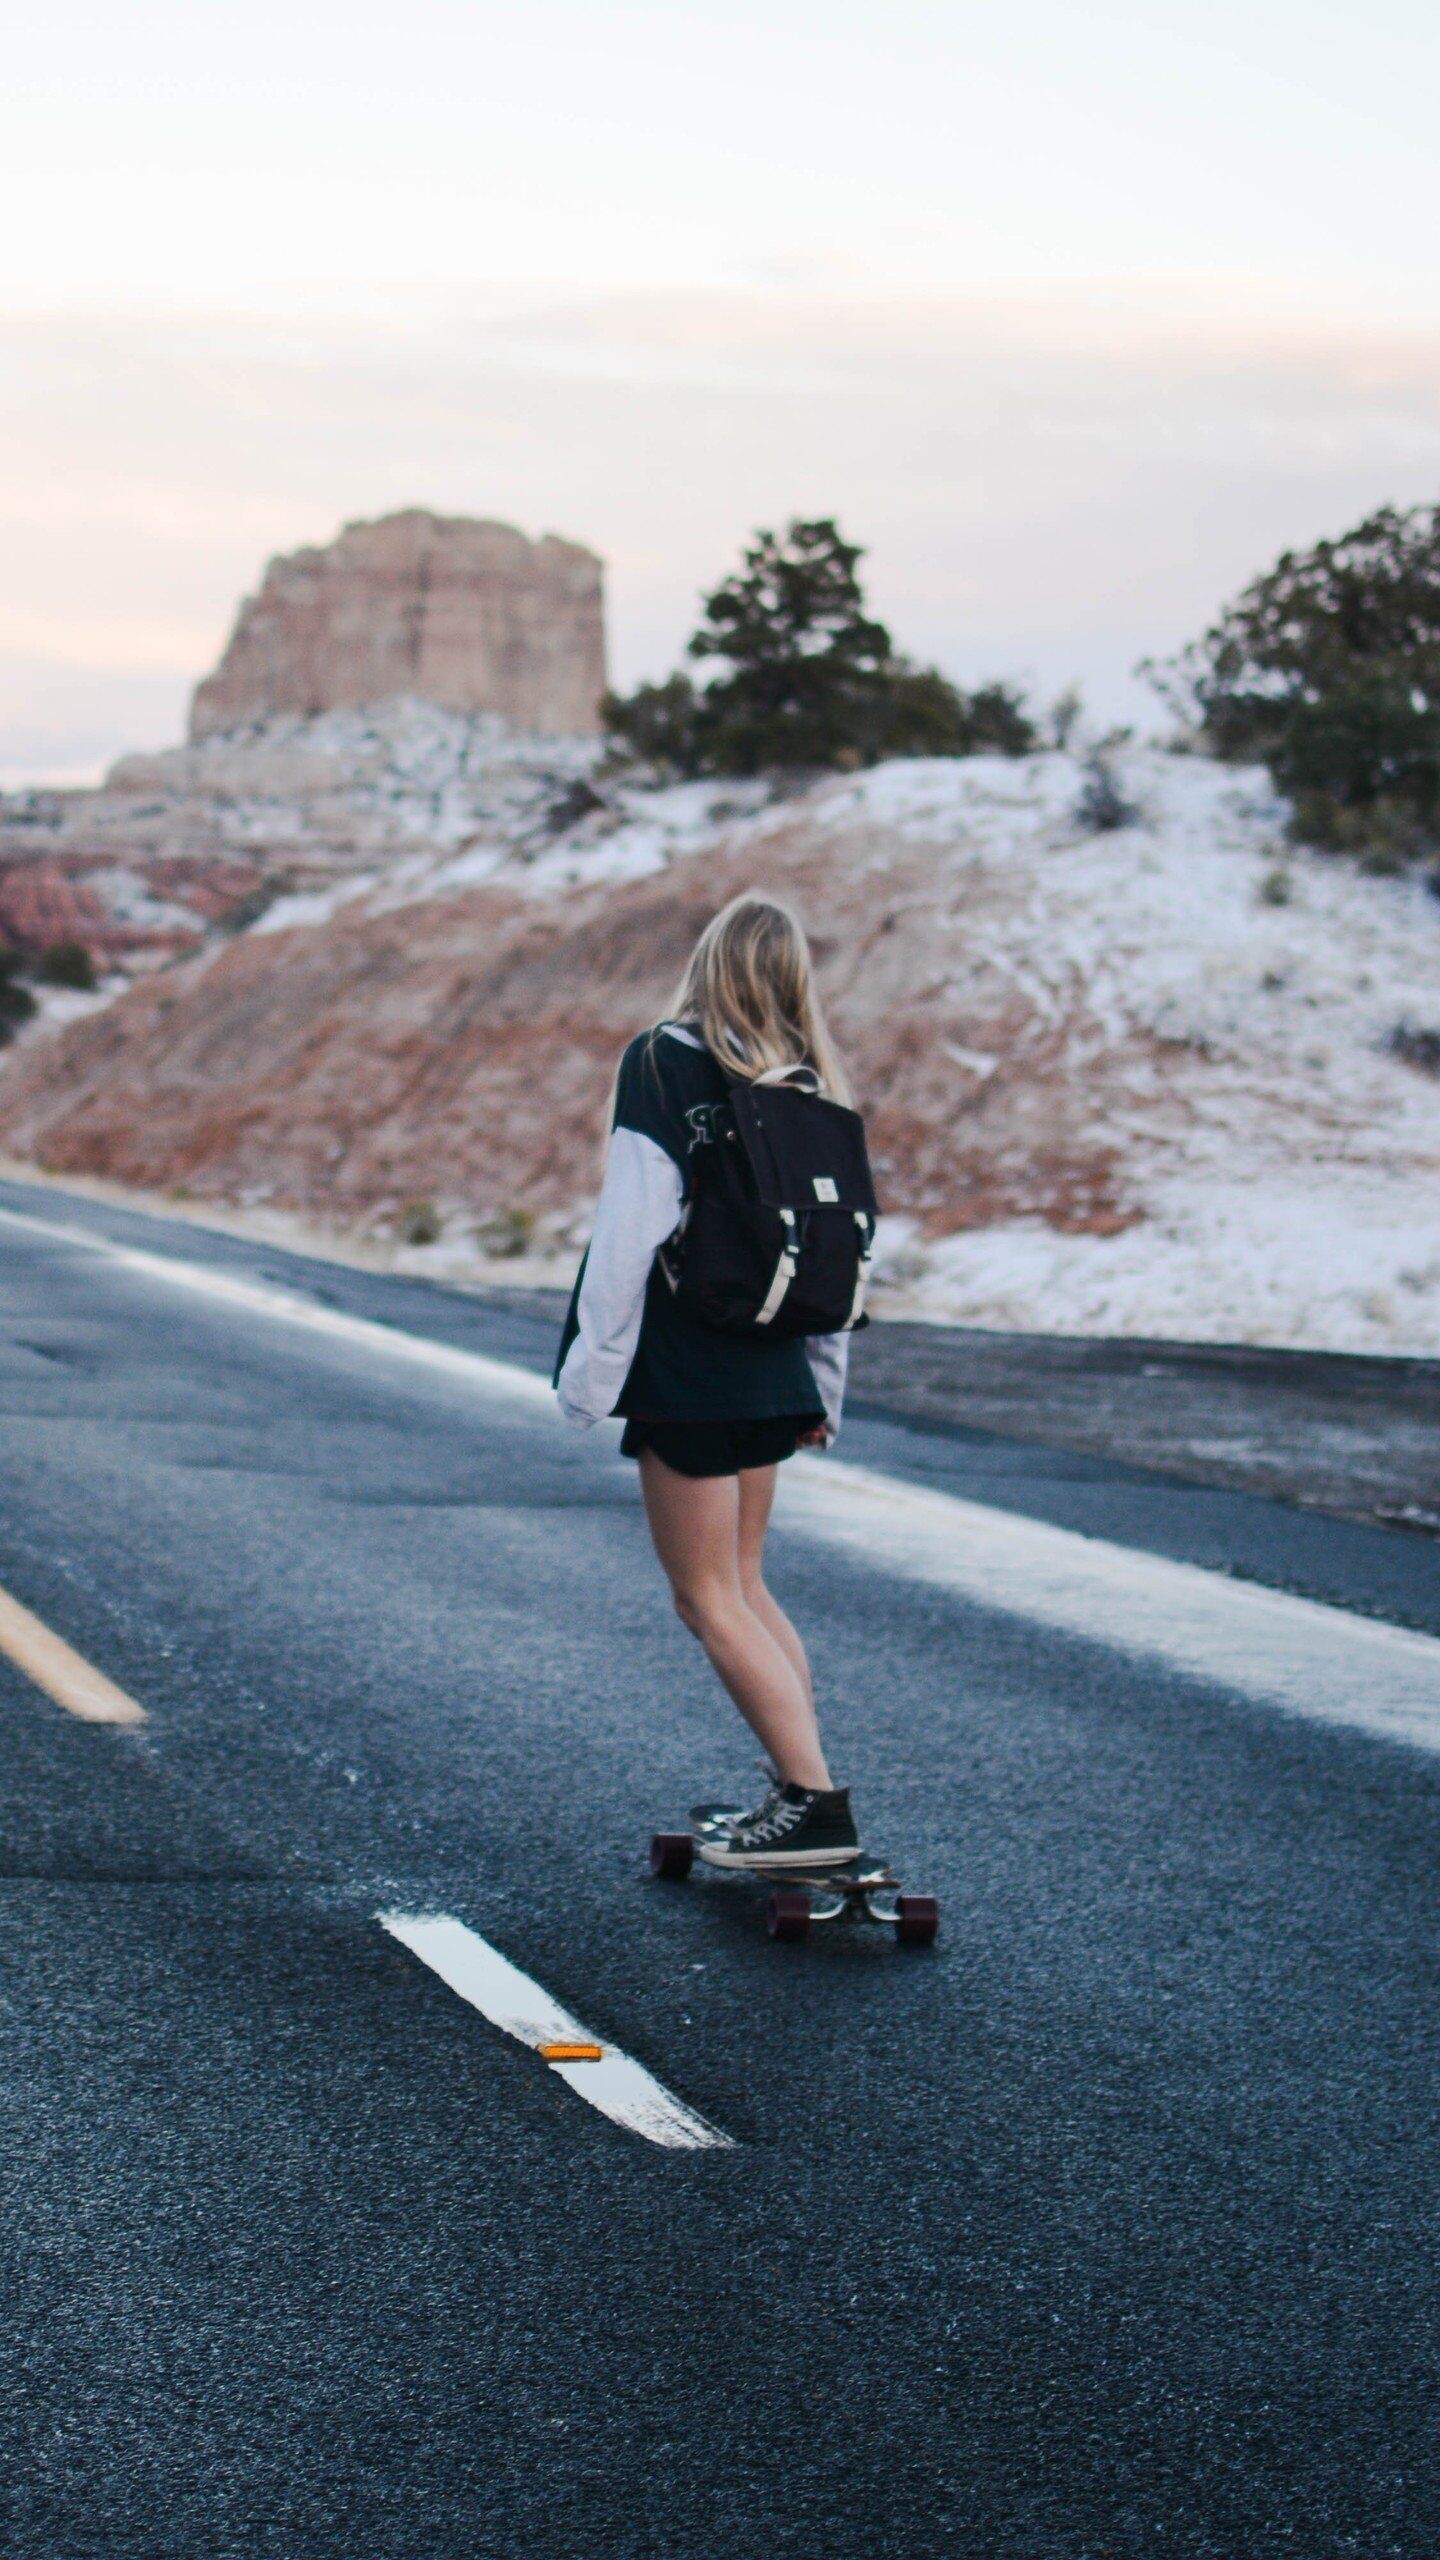 Girl Skateboarding: Longboarding, A fun, affordable and very portable way of short term transportation, Road surface. 1440x2560 HD Wallpaper.